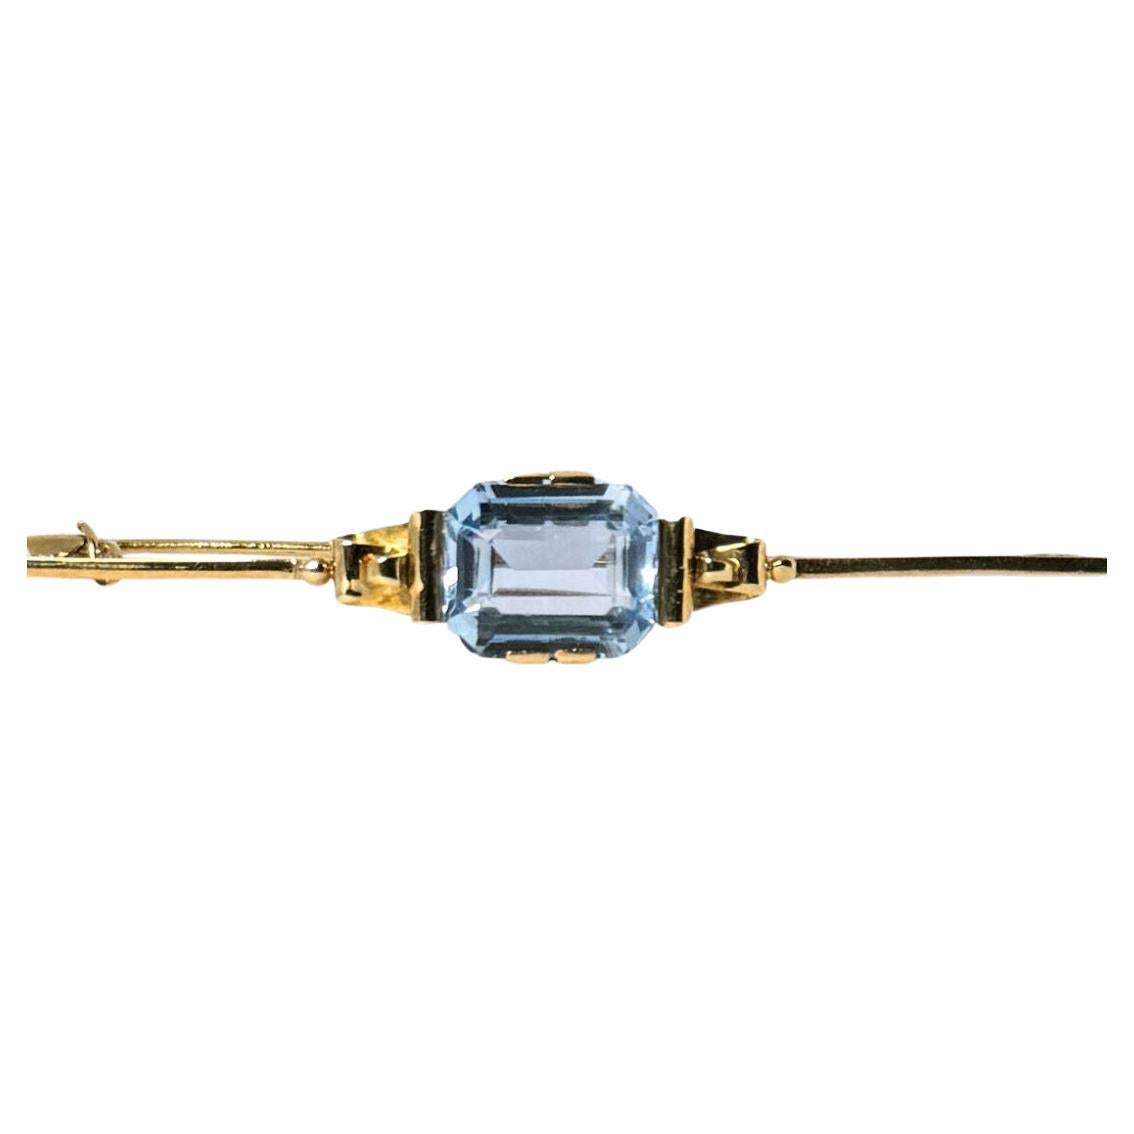 European vintage pin 14 carat gold with blue topaz For Sale